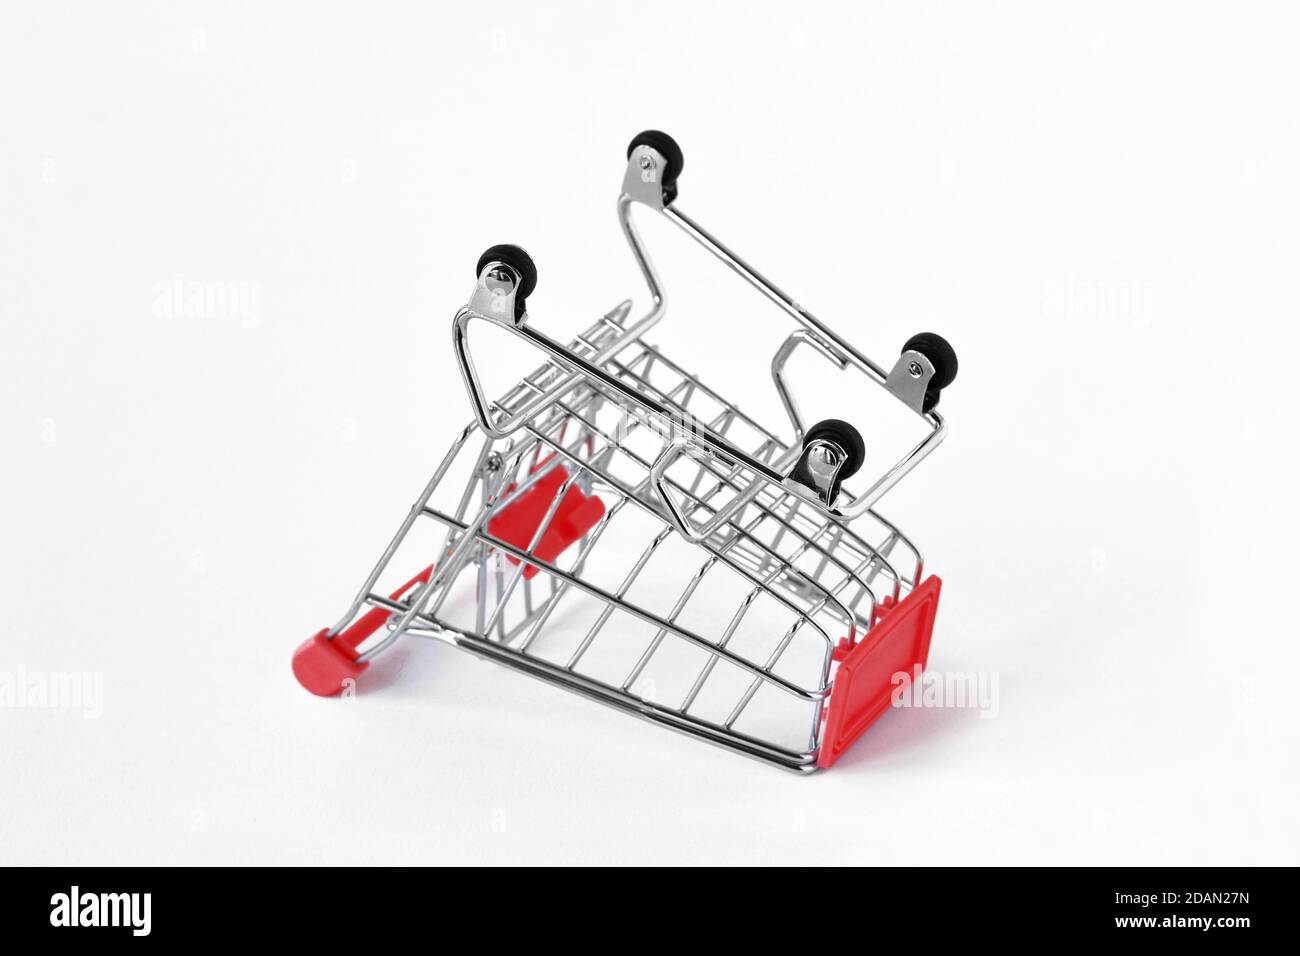 Empty inverted shopping cart on white background - Concept of shopping cart abandonment Stock Photo